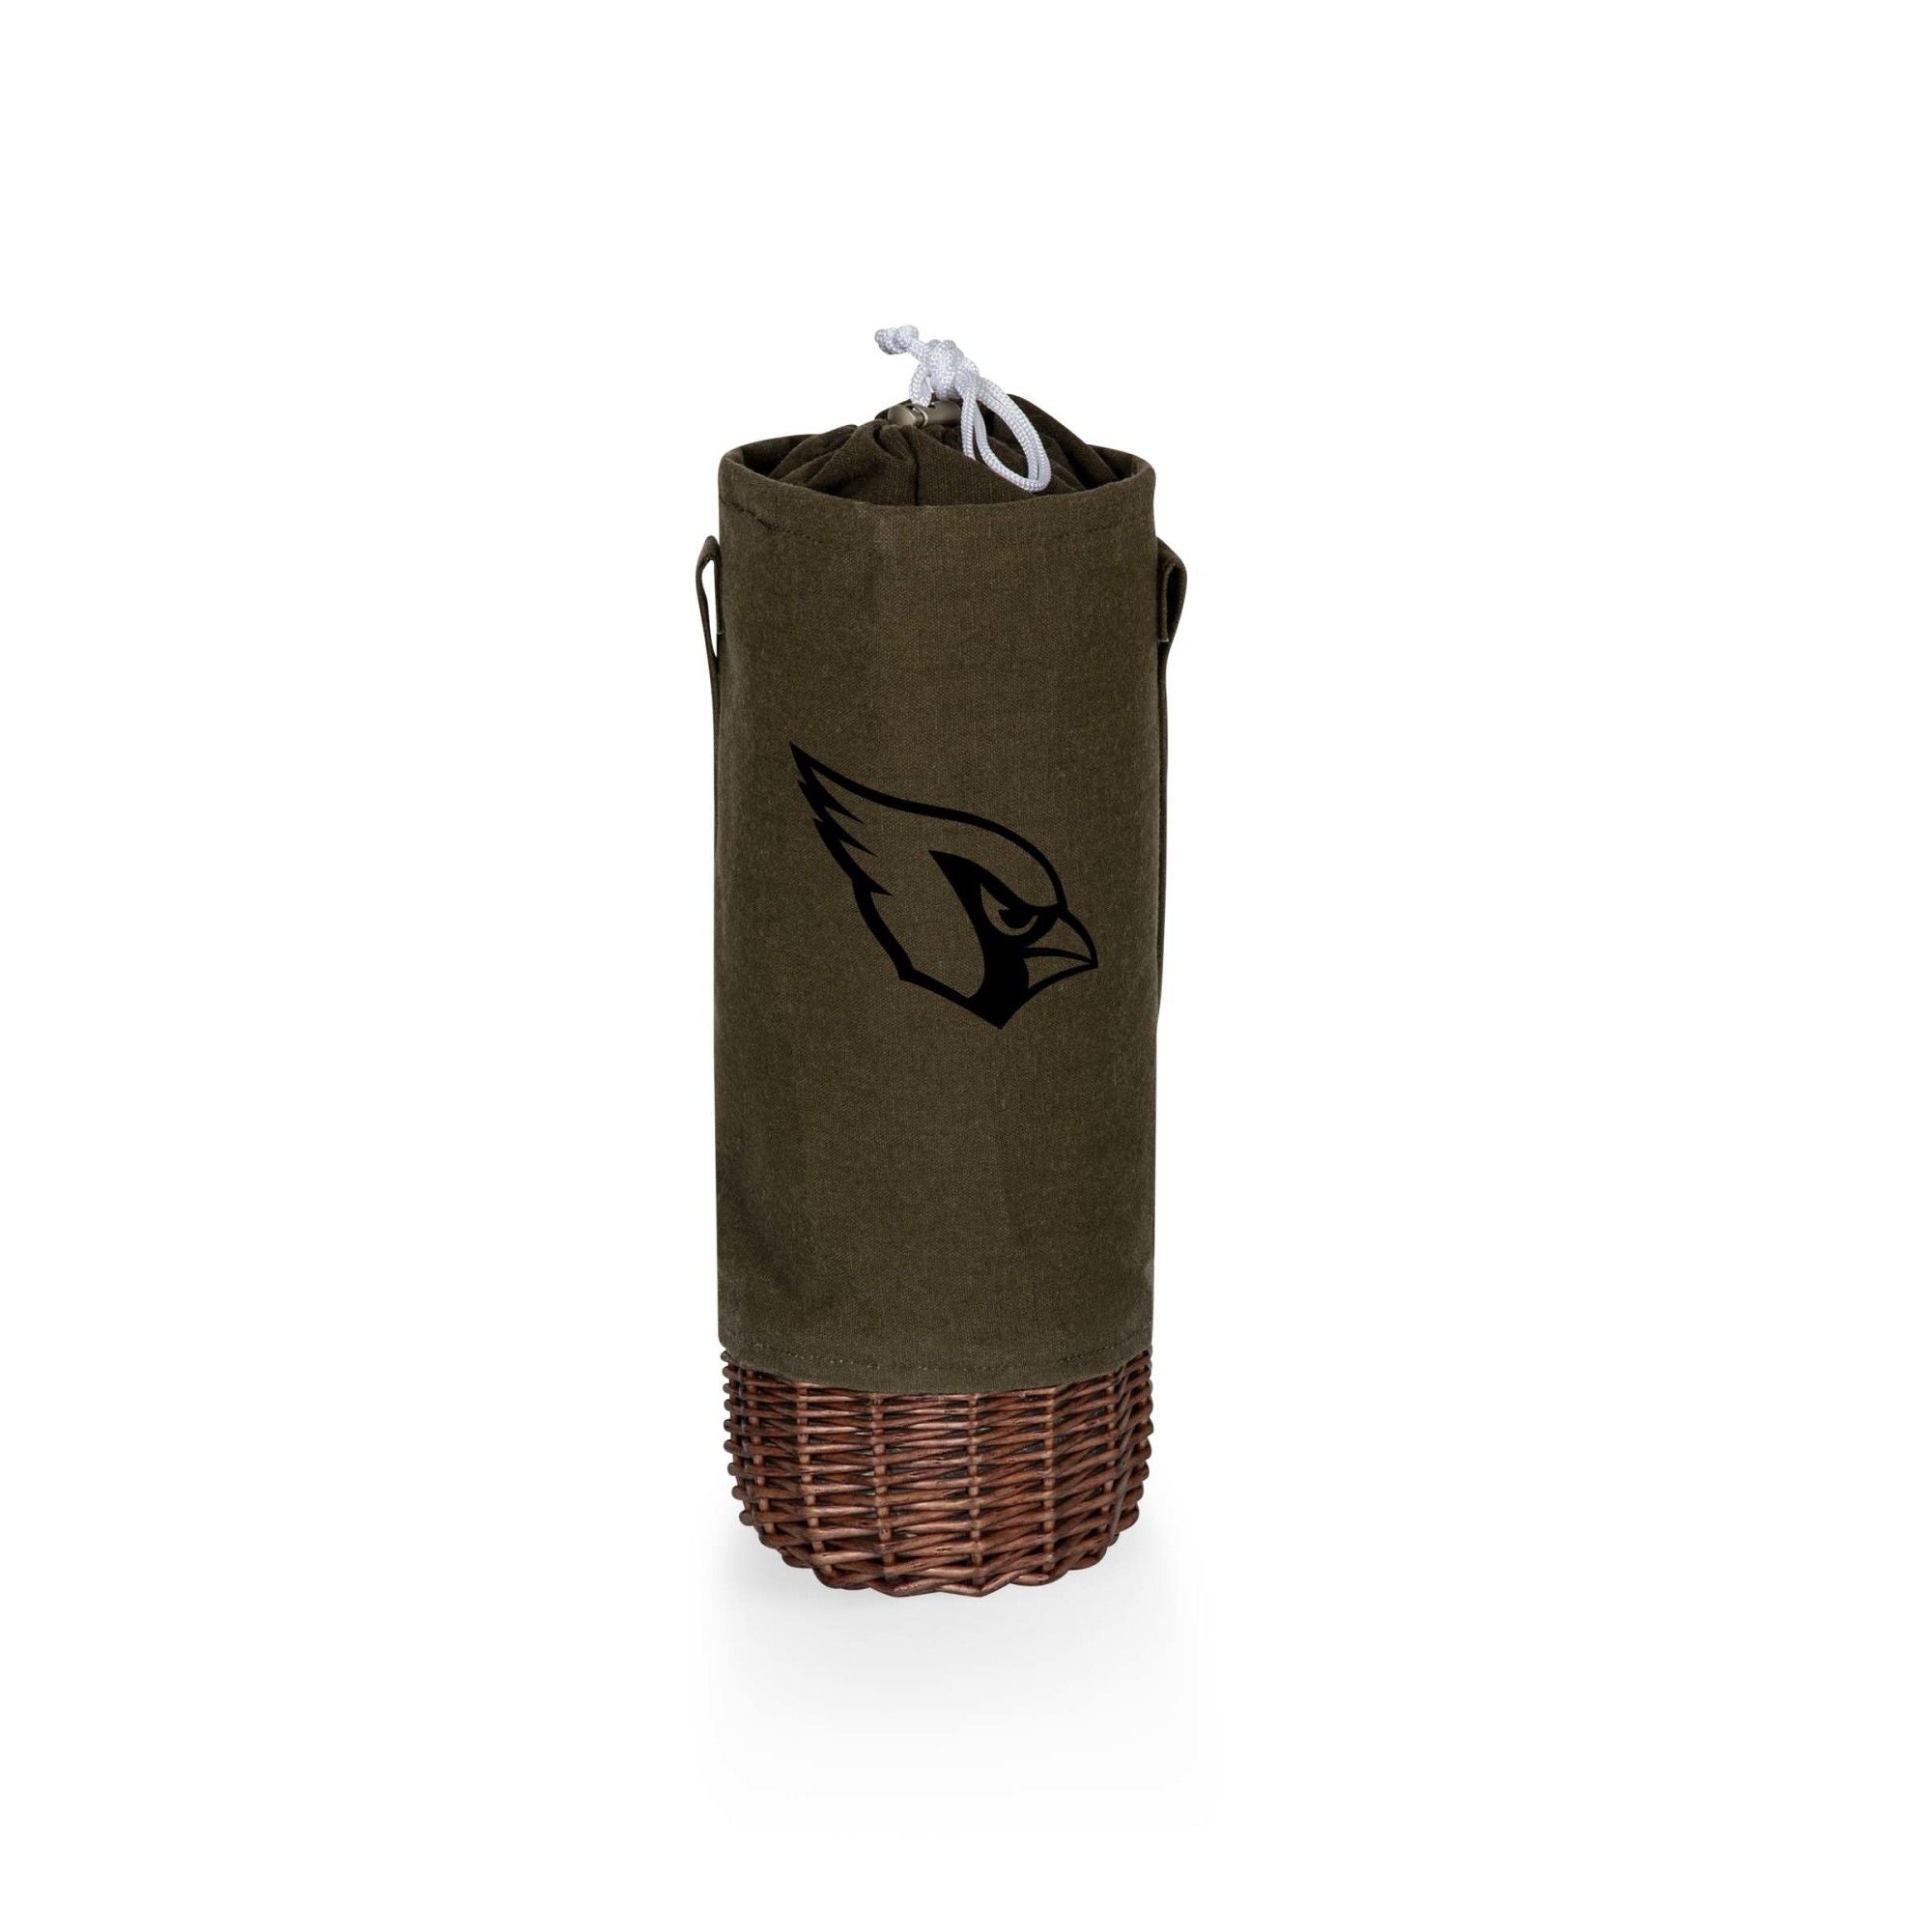 Arizona Cardinals - Malbec Insulated Canvas and Willow Wine Bottle Basket, (Khaki Green with Beige Accents)